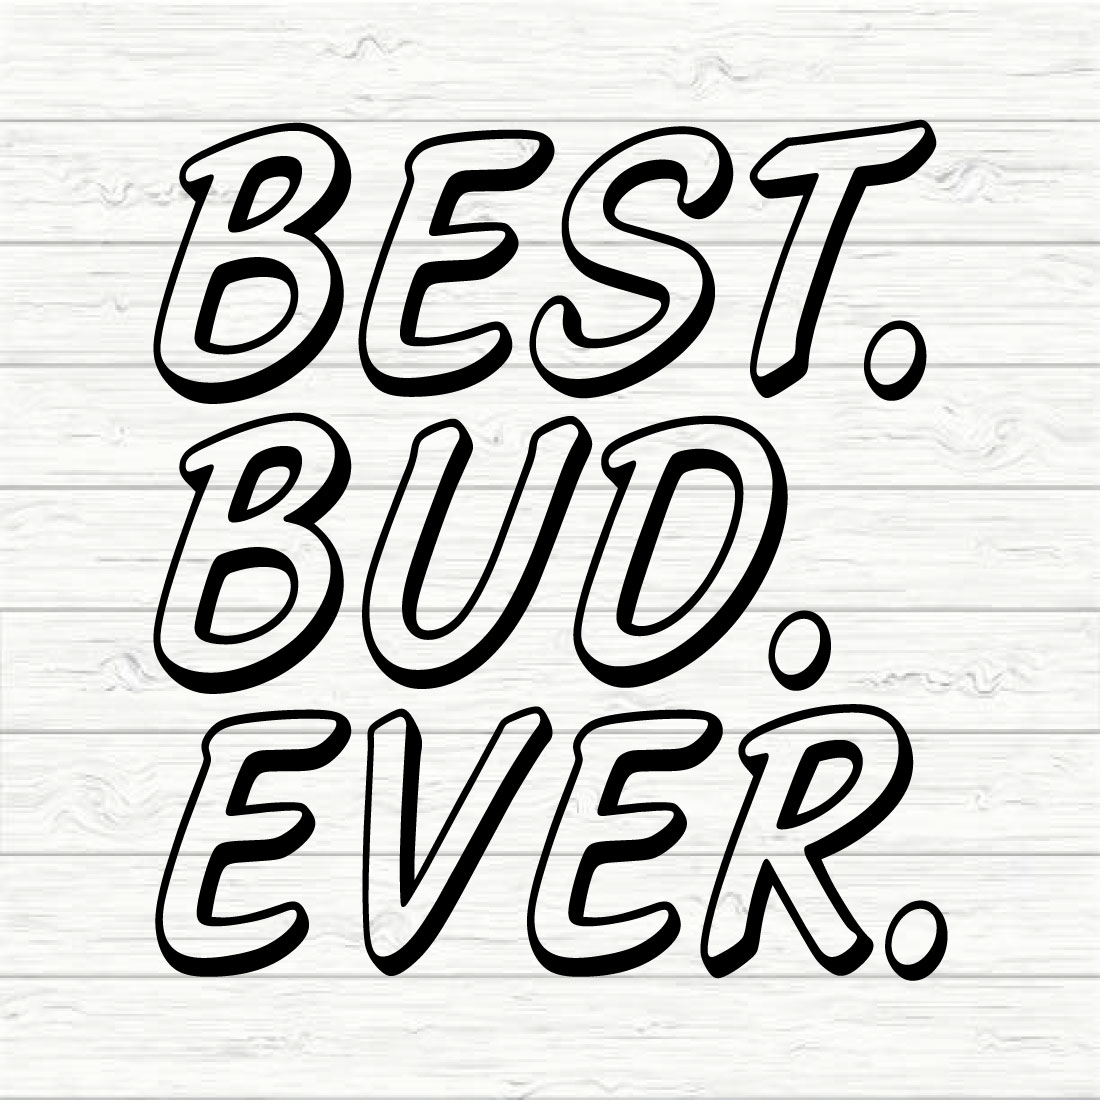 Best bud ever preview image.